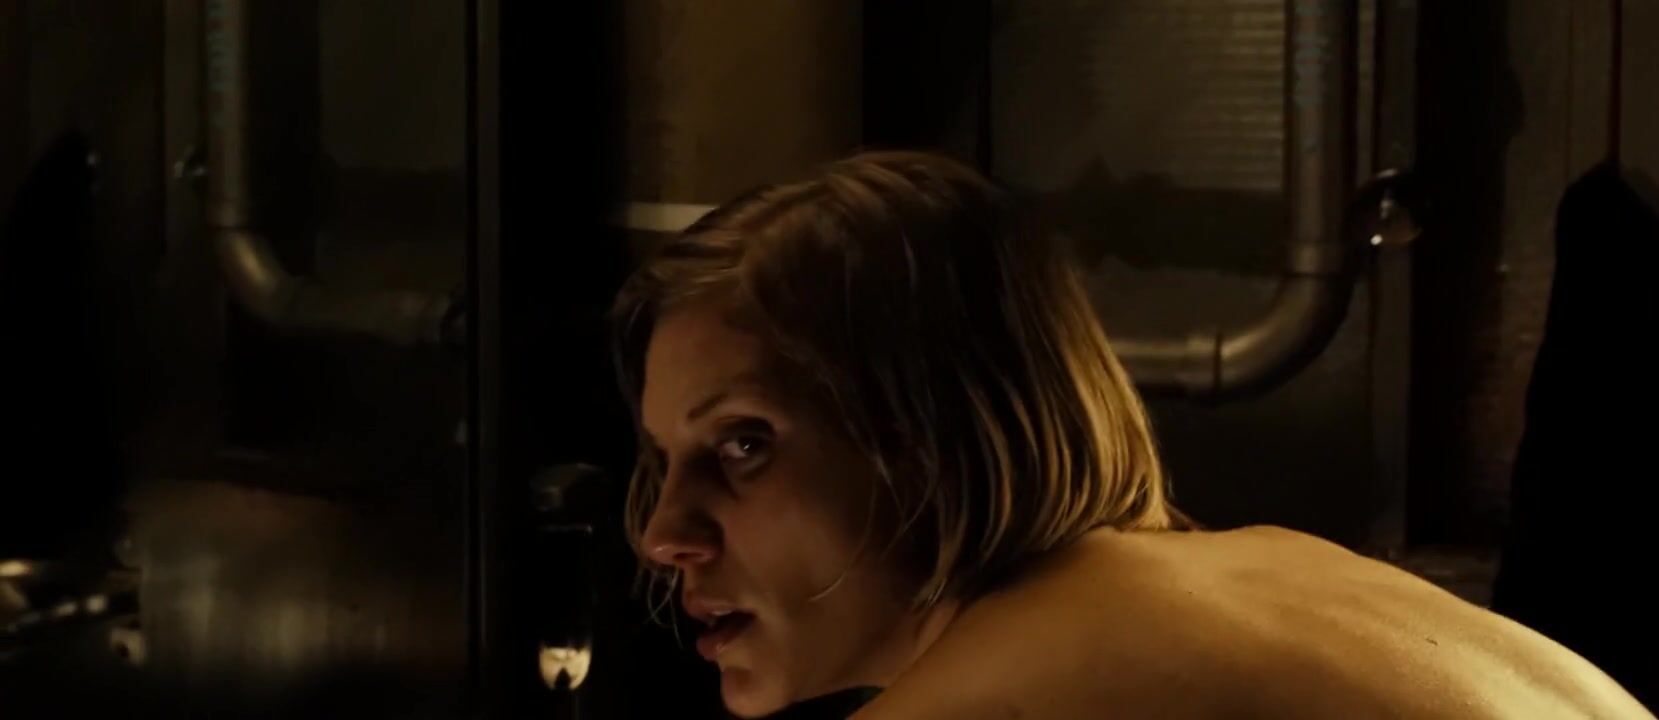 Real Orgasms Riddick tells story of Katee Sackhoff who takes clothes off and goes washing body (2013) Three Some - 1